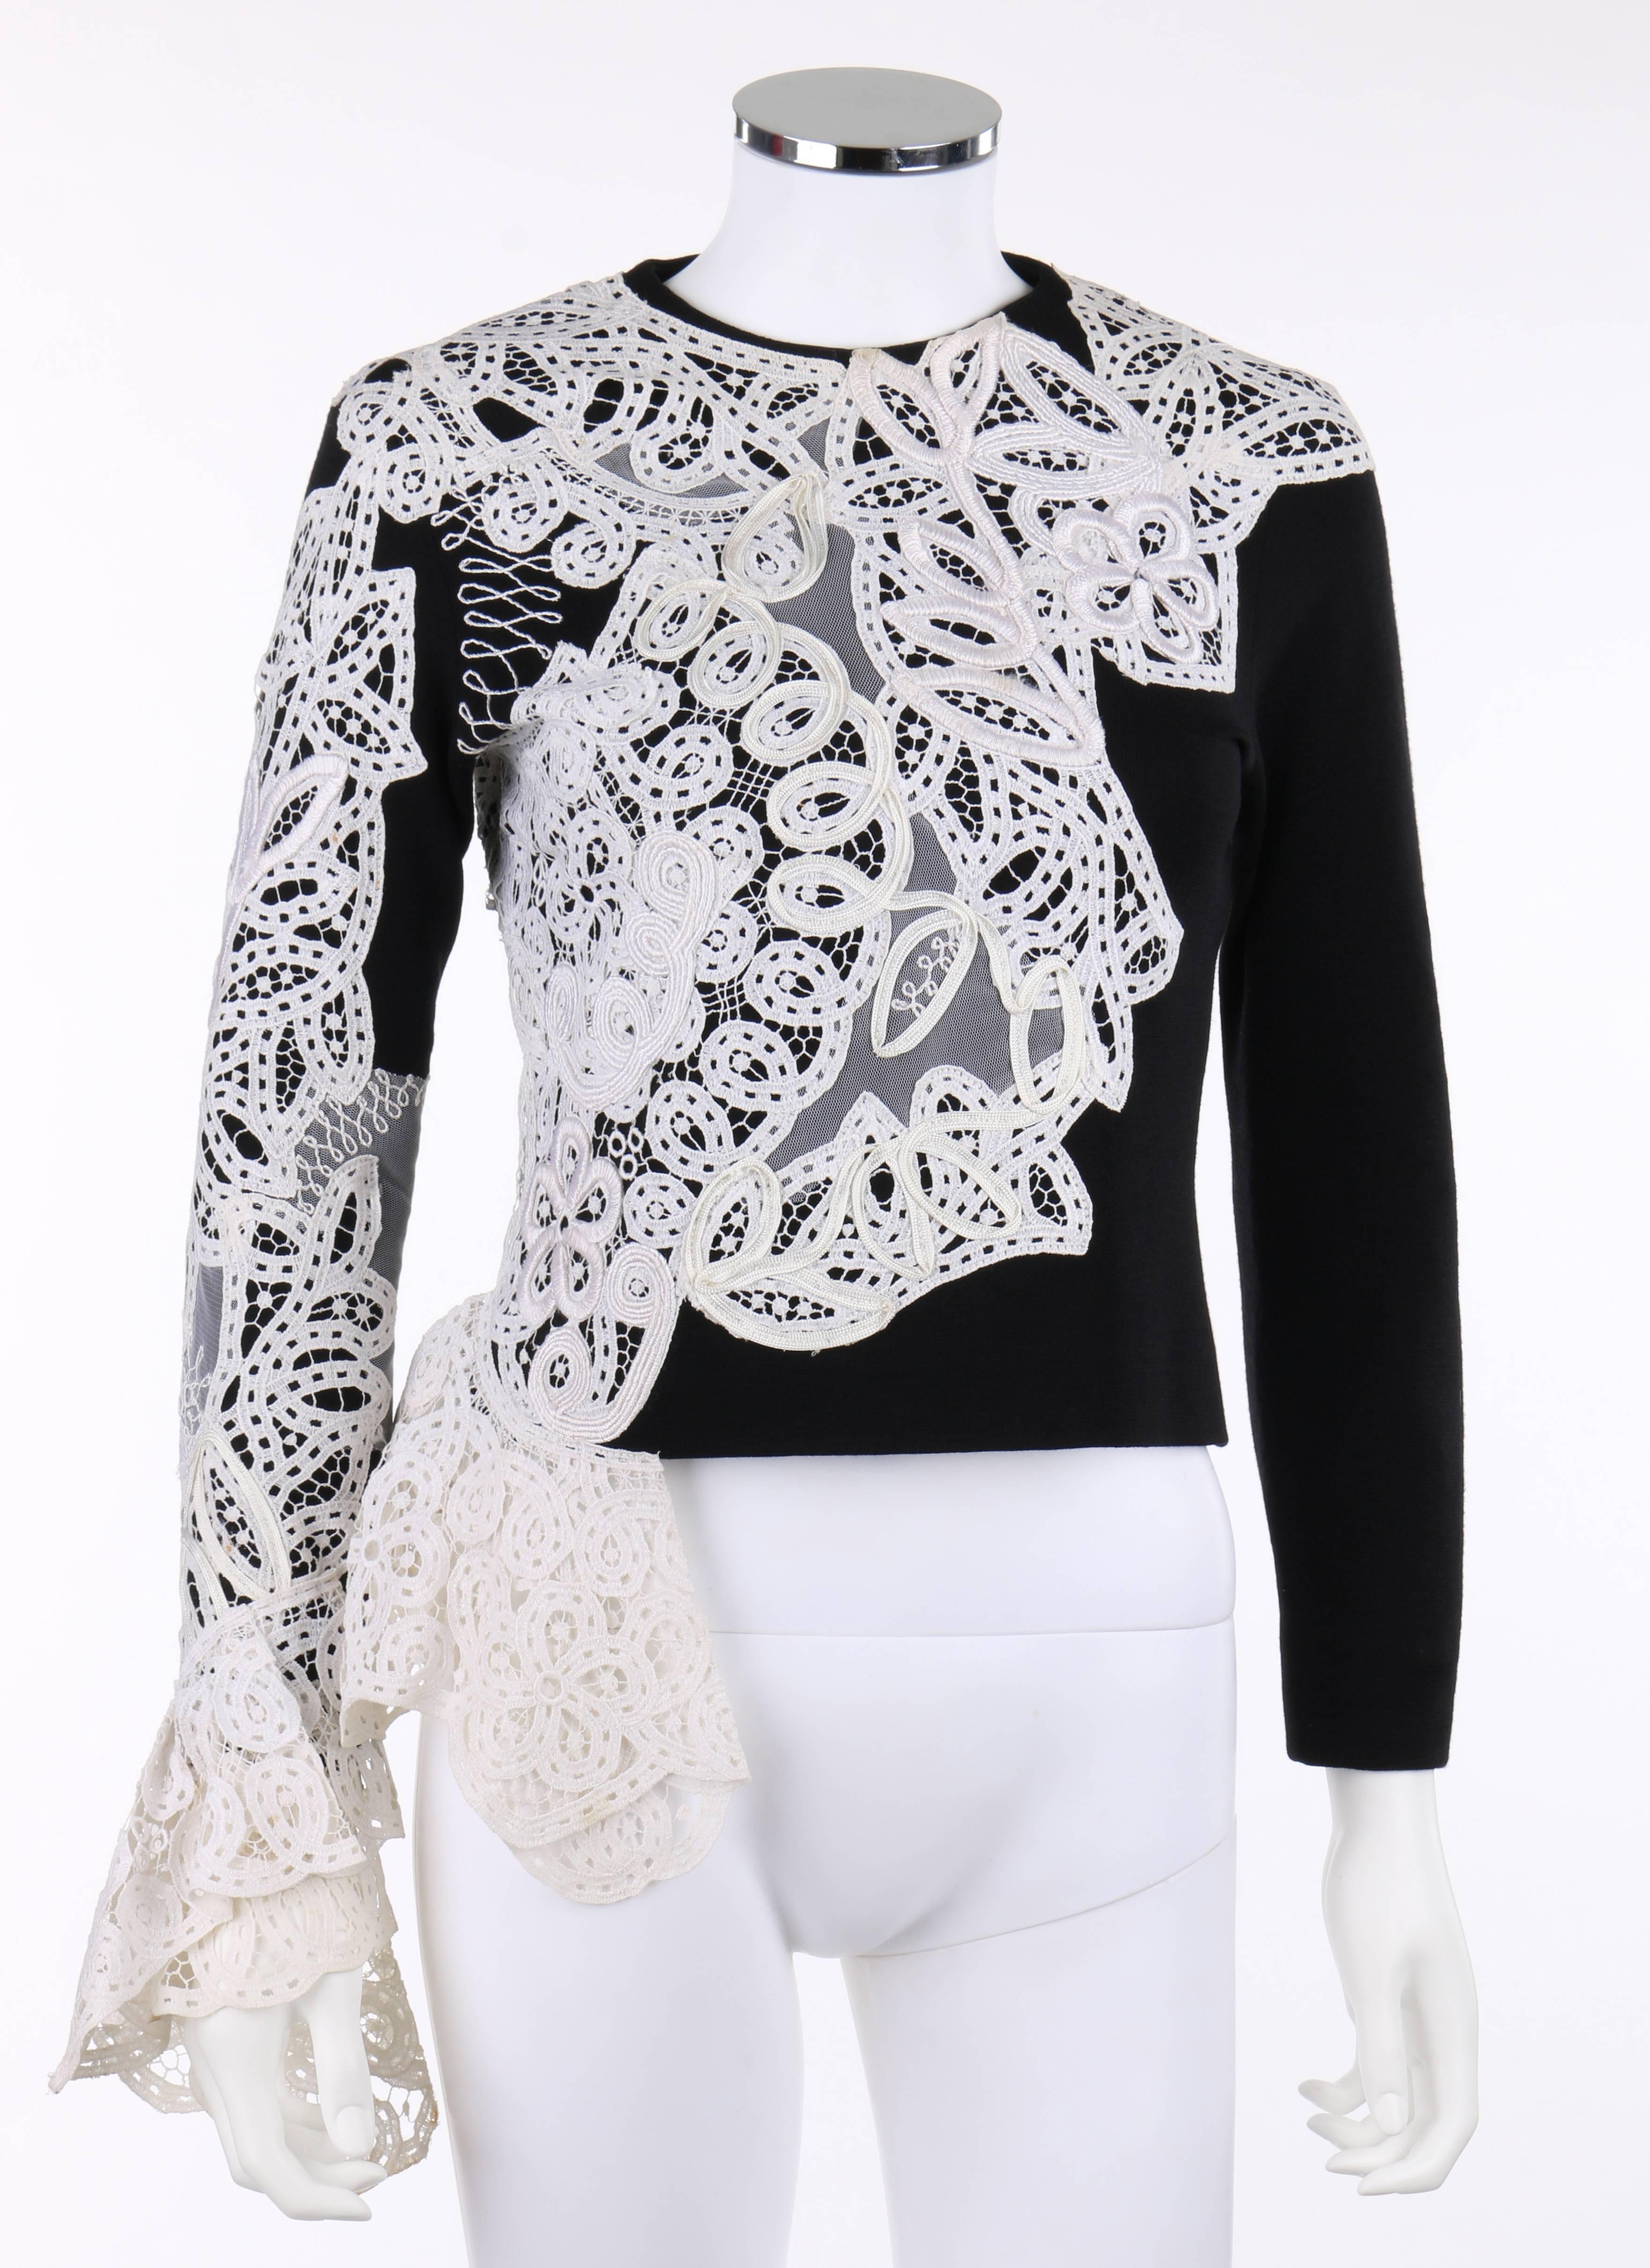 Vintage Gianfranco Ferre A/W 1988 black wool knit white avant garde lace applique top. White floral lace, braid, and tulle asymmetrical applique detail. Flounced lace at right cuff and hemline. Black wool jersey. Crew neckline. Long sleeves with